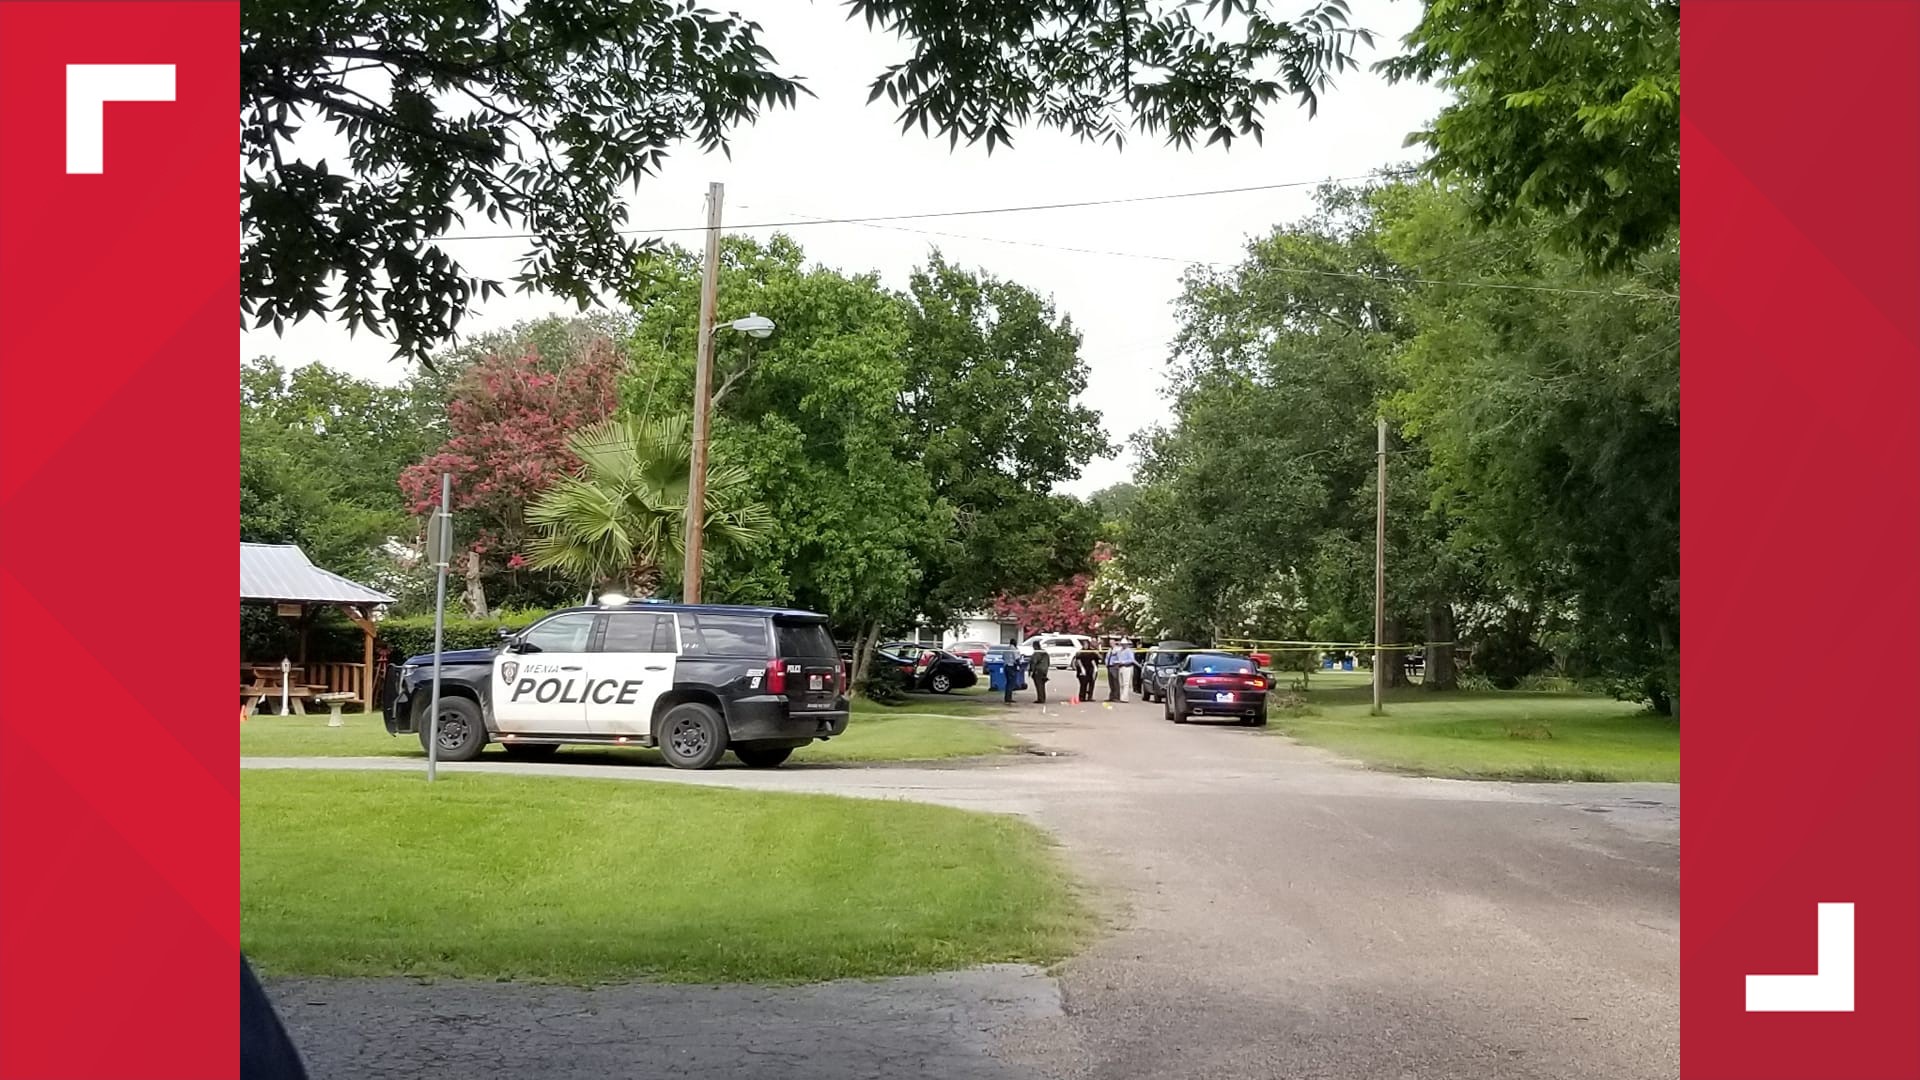 Two people were hurt in a shooting in the 1000 block of East Hunt Street in Mexia, the Groesbeck Police Department said on Facebook around 5:45 p.m. The victims were taken to Baylor Scott and White Hillcrest Hospital in Waco, the post said.